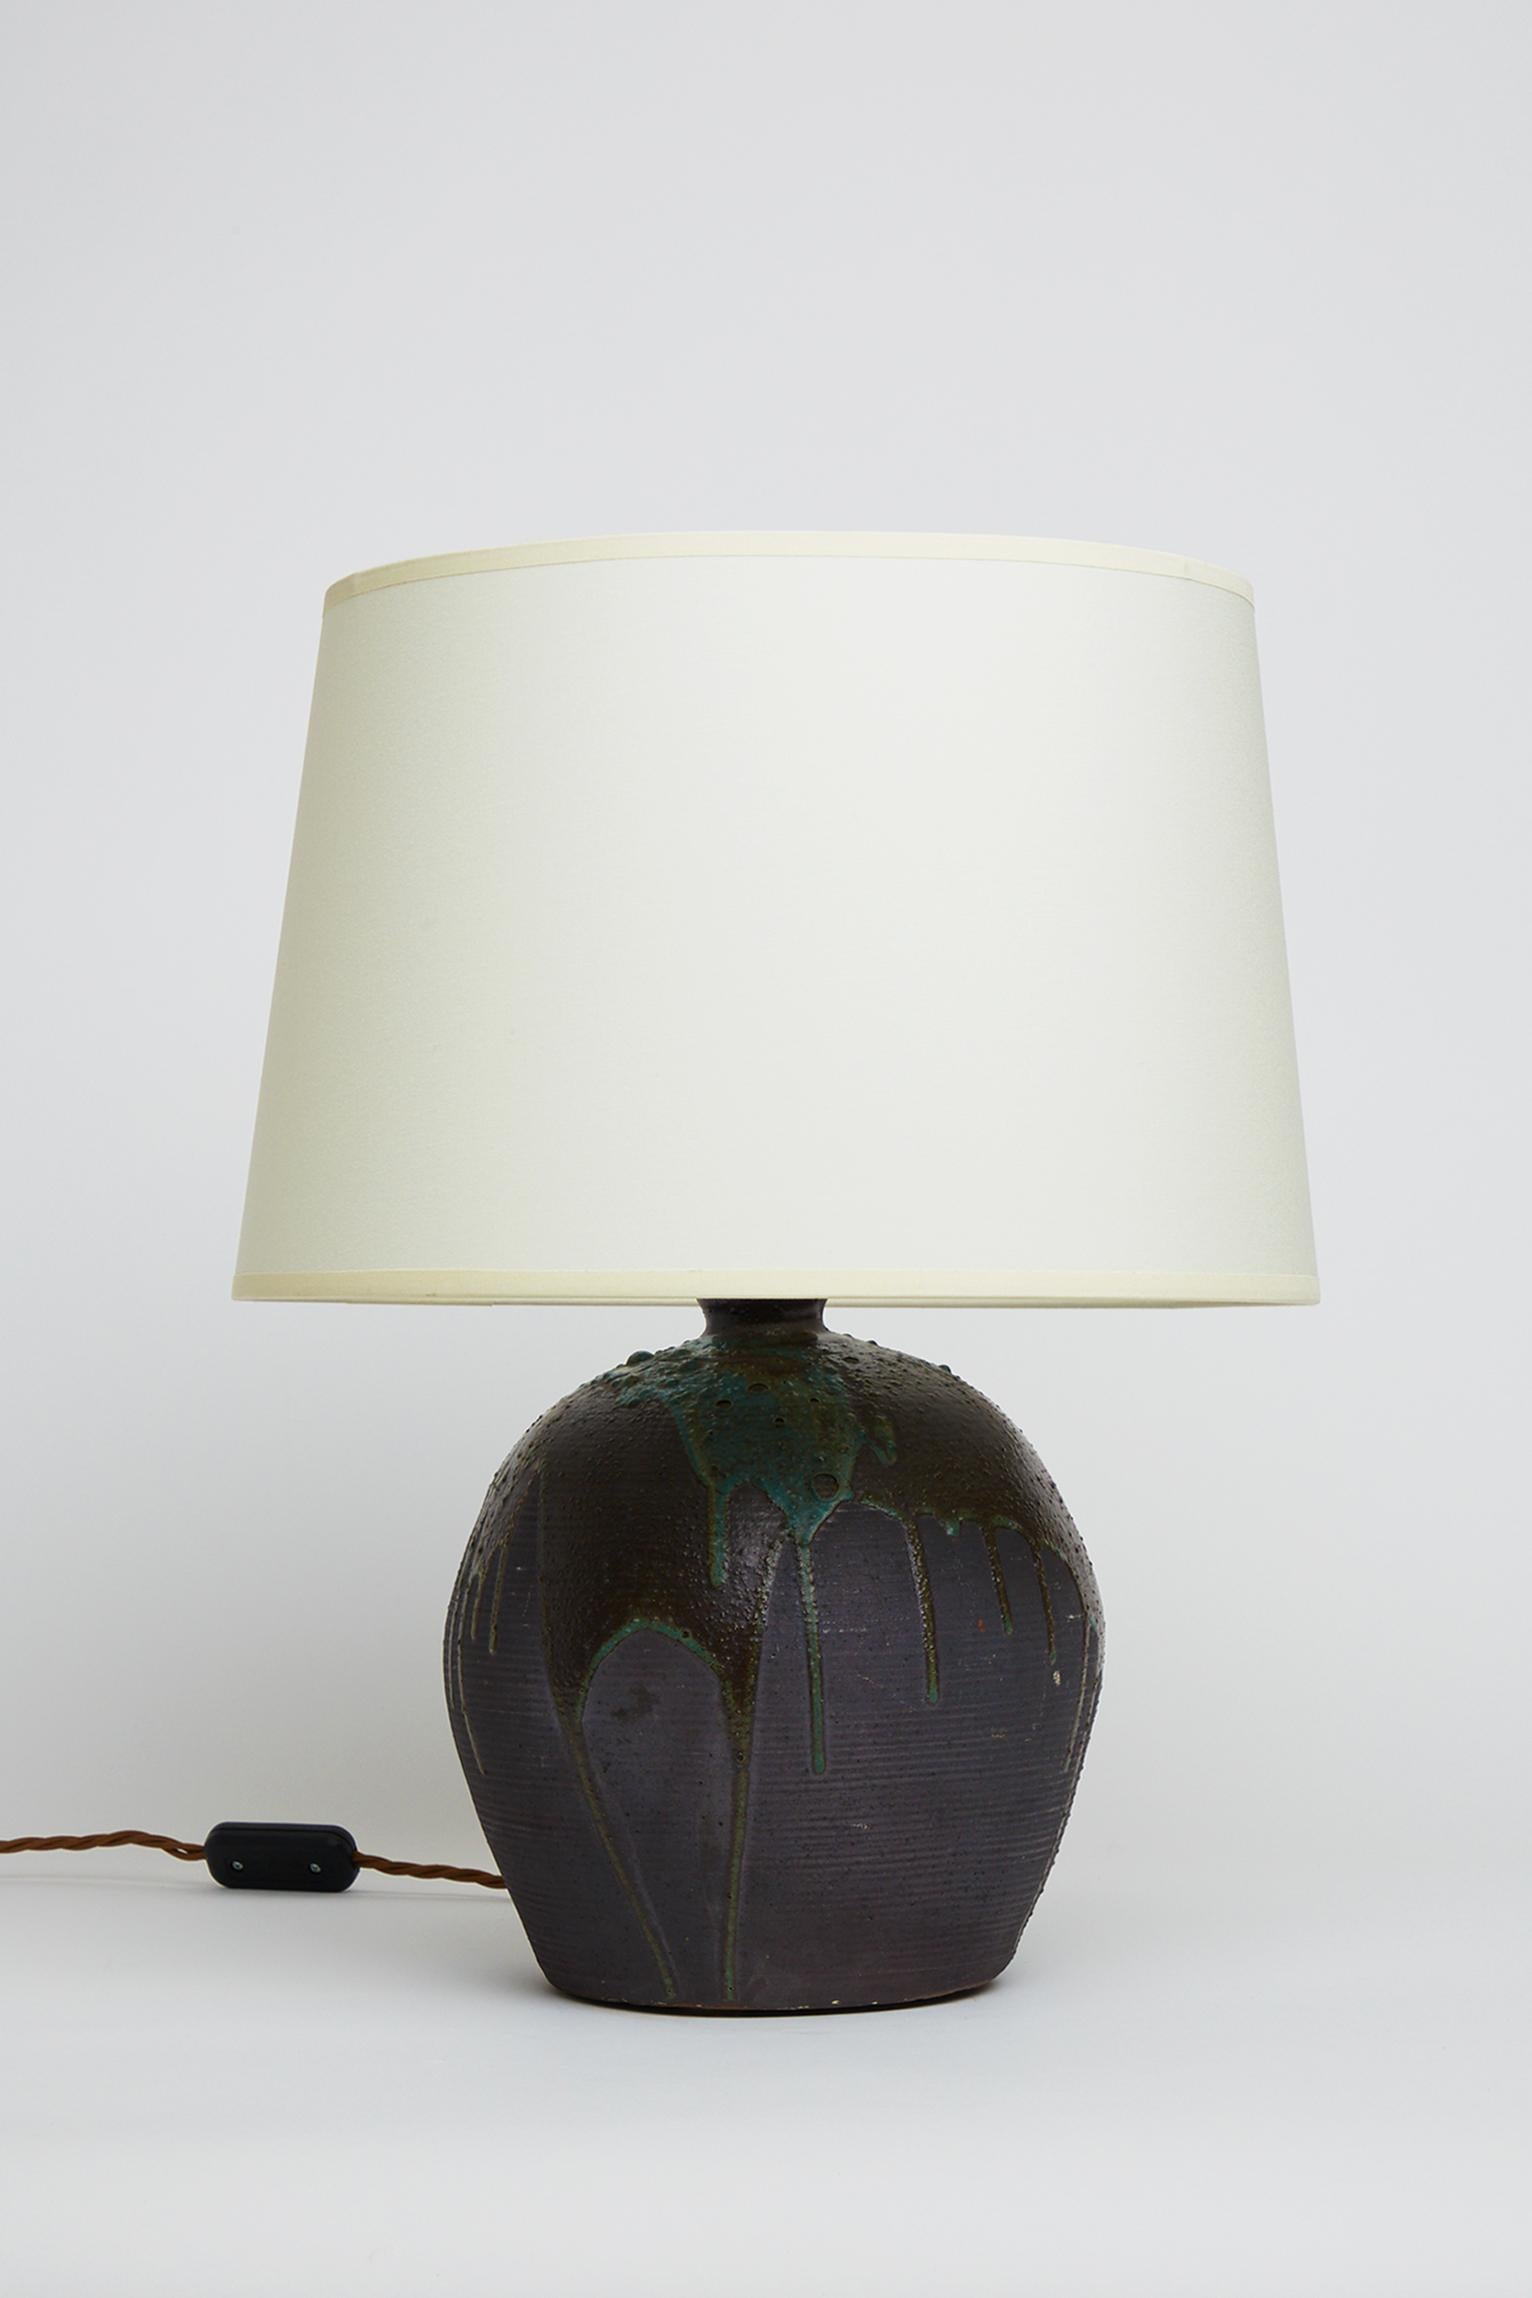 A pair of turned Puisaye stoneware table lamps, by Leon Pointu (1879-1942). Signature stamped. 
France, Circa 1920.
Measures: With the shade: 46.5 cm high by 35 cm diameter.
Lamp base only: 28 cm high by 21 cm diameter.